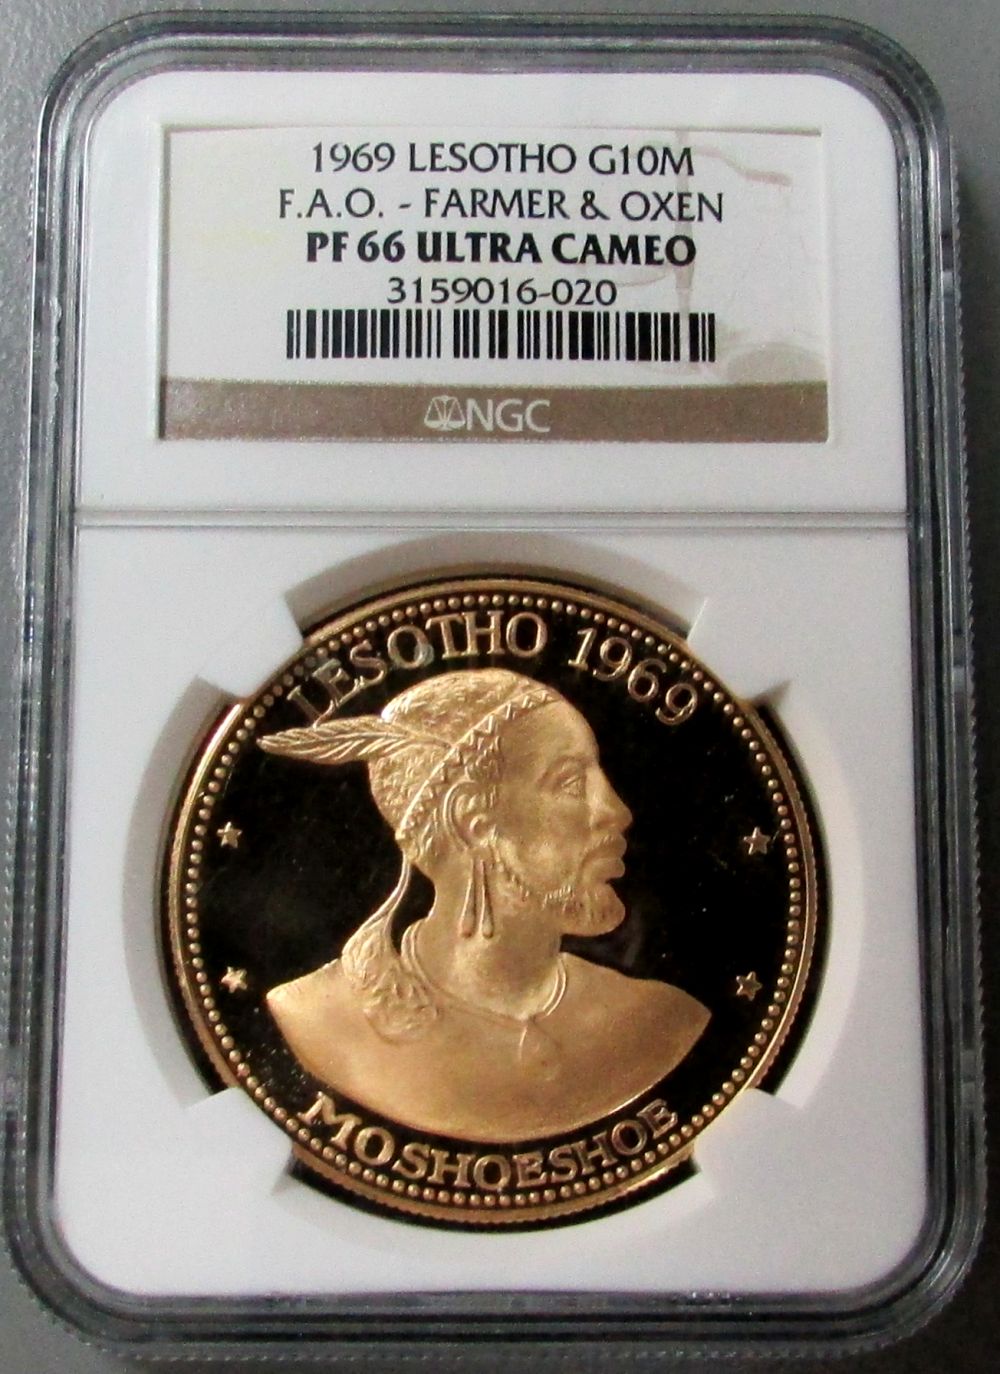 1969 GOLD LESOTHO 10 MALOTI NGC PROOF 66 ULTRA CAMEO "F.A.O .FOOD & AGRICULTURE ORGANIZATION OF THE UNITED NATIONS" 